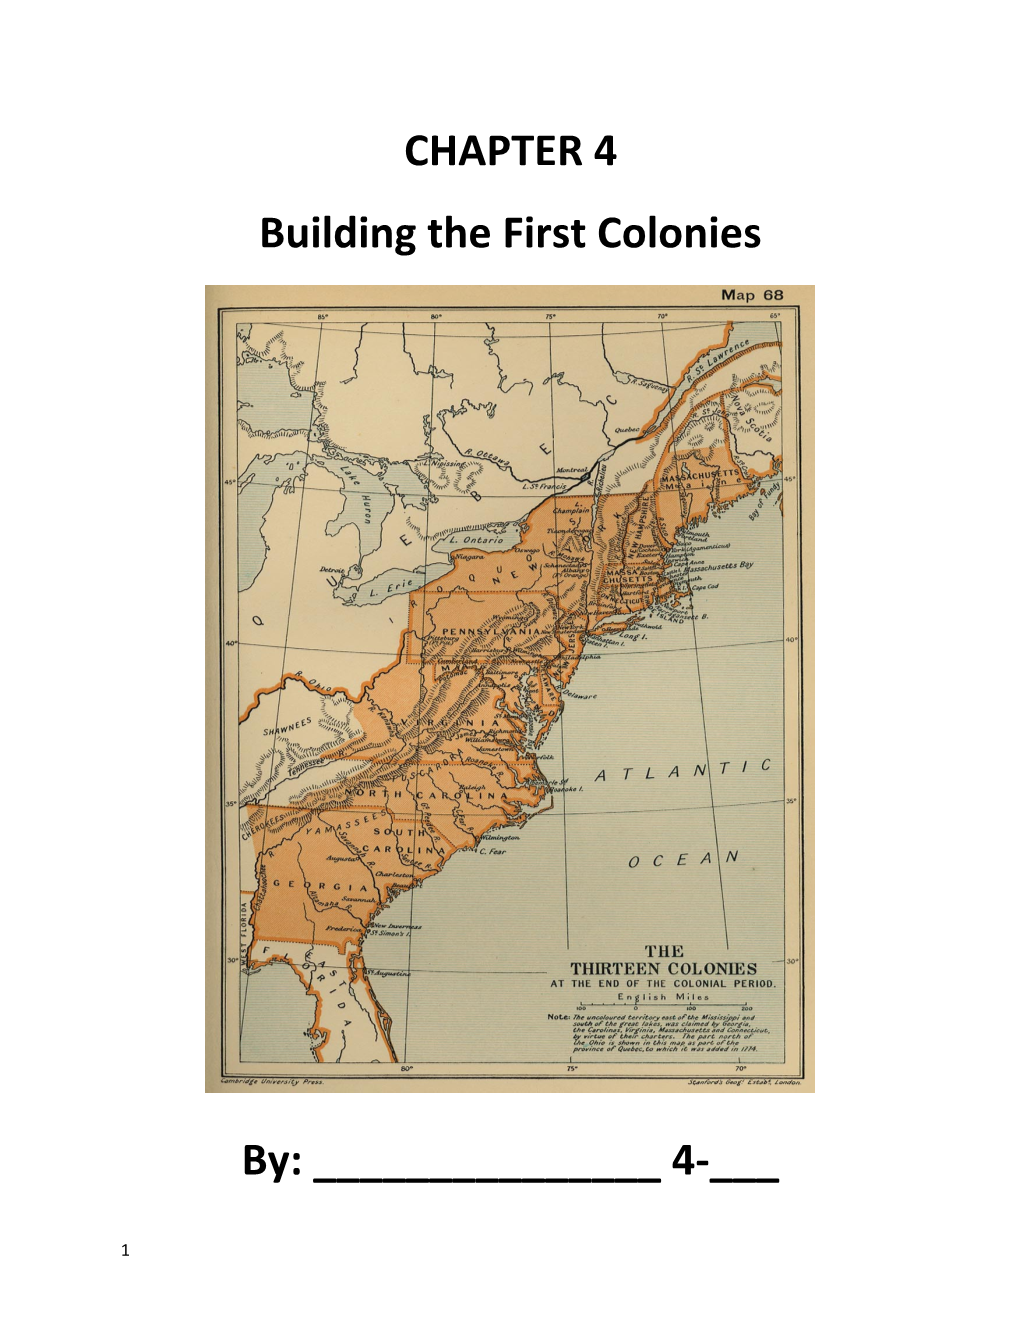 Building the First Colonies